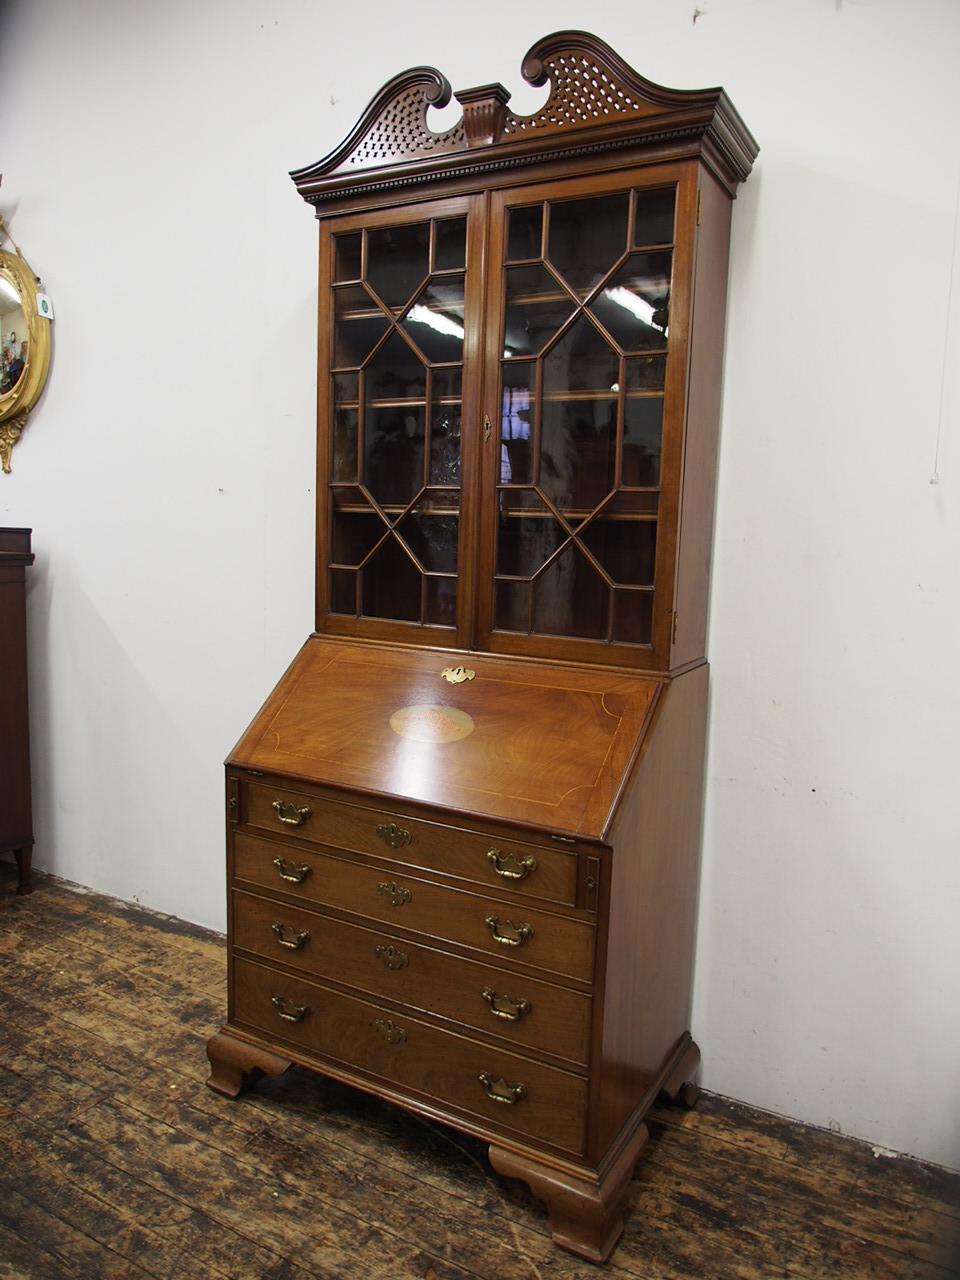 George III style mahogany bureau bookcase, circa 1880. The tall arched swan neck pediment with open fretwork sits over a moulded dentil cornice. The twin astragal glazed doors open to reveal three adjustable shelves, and the bureau has a shell and